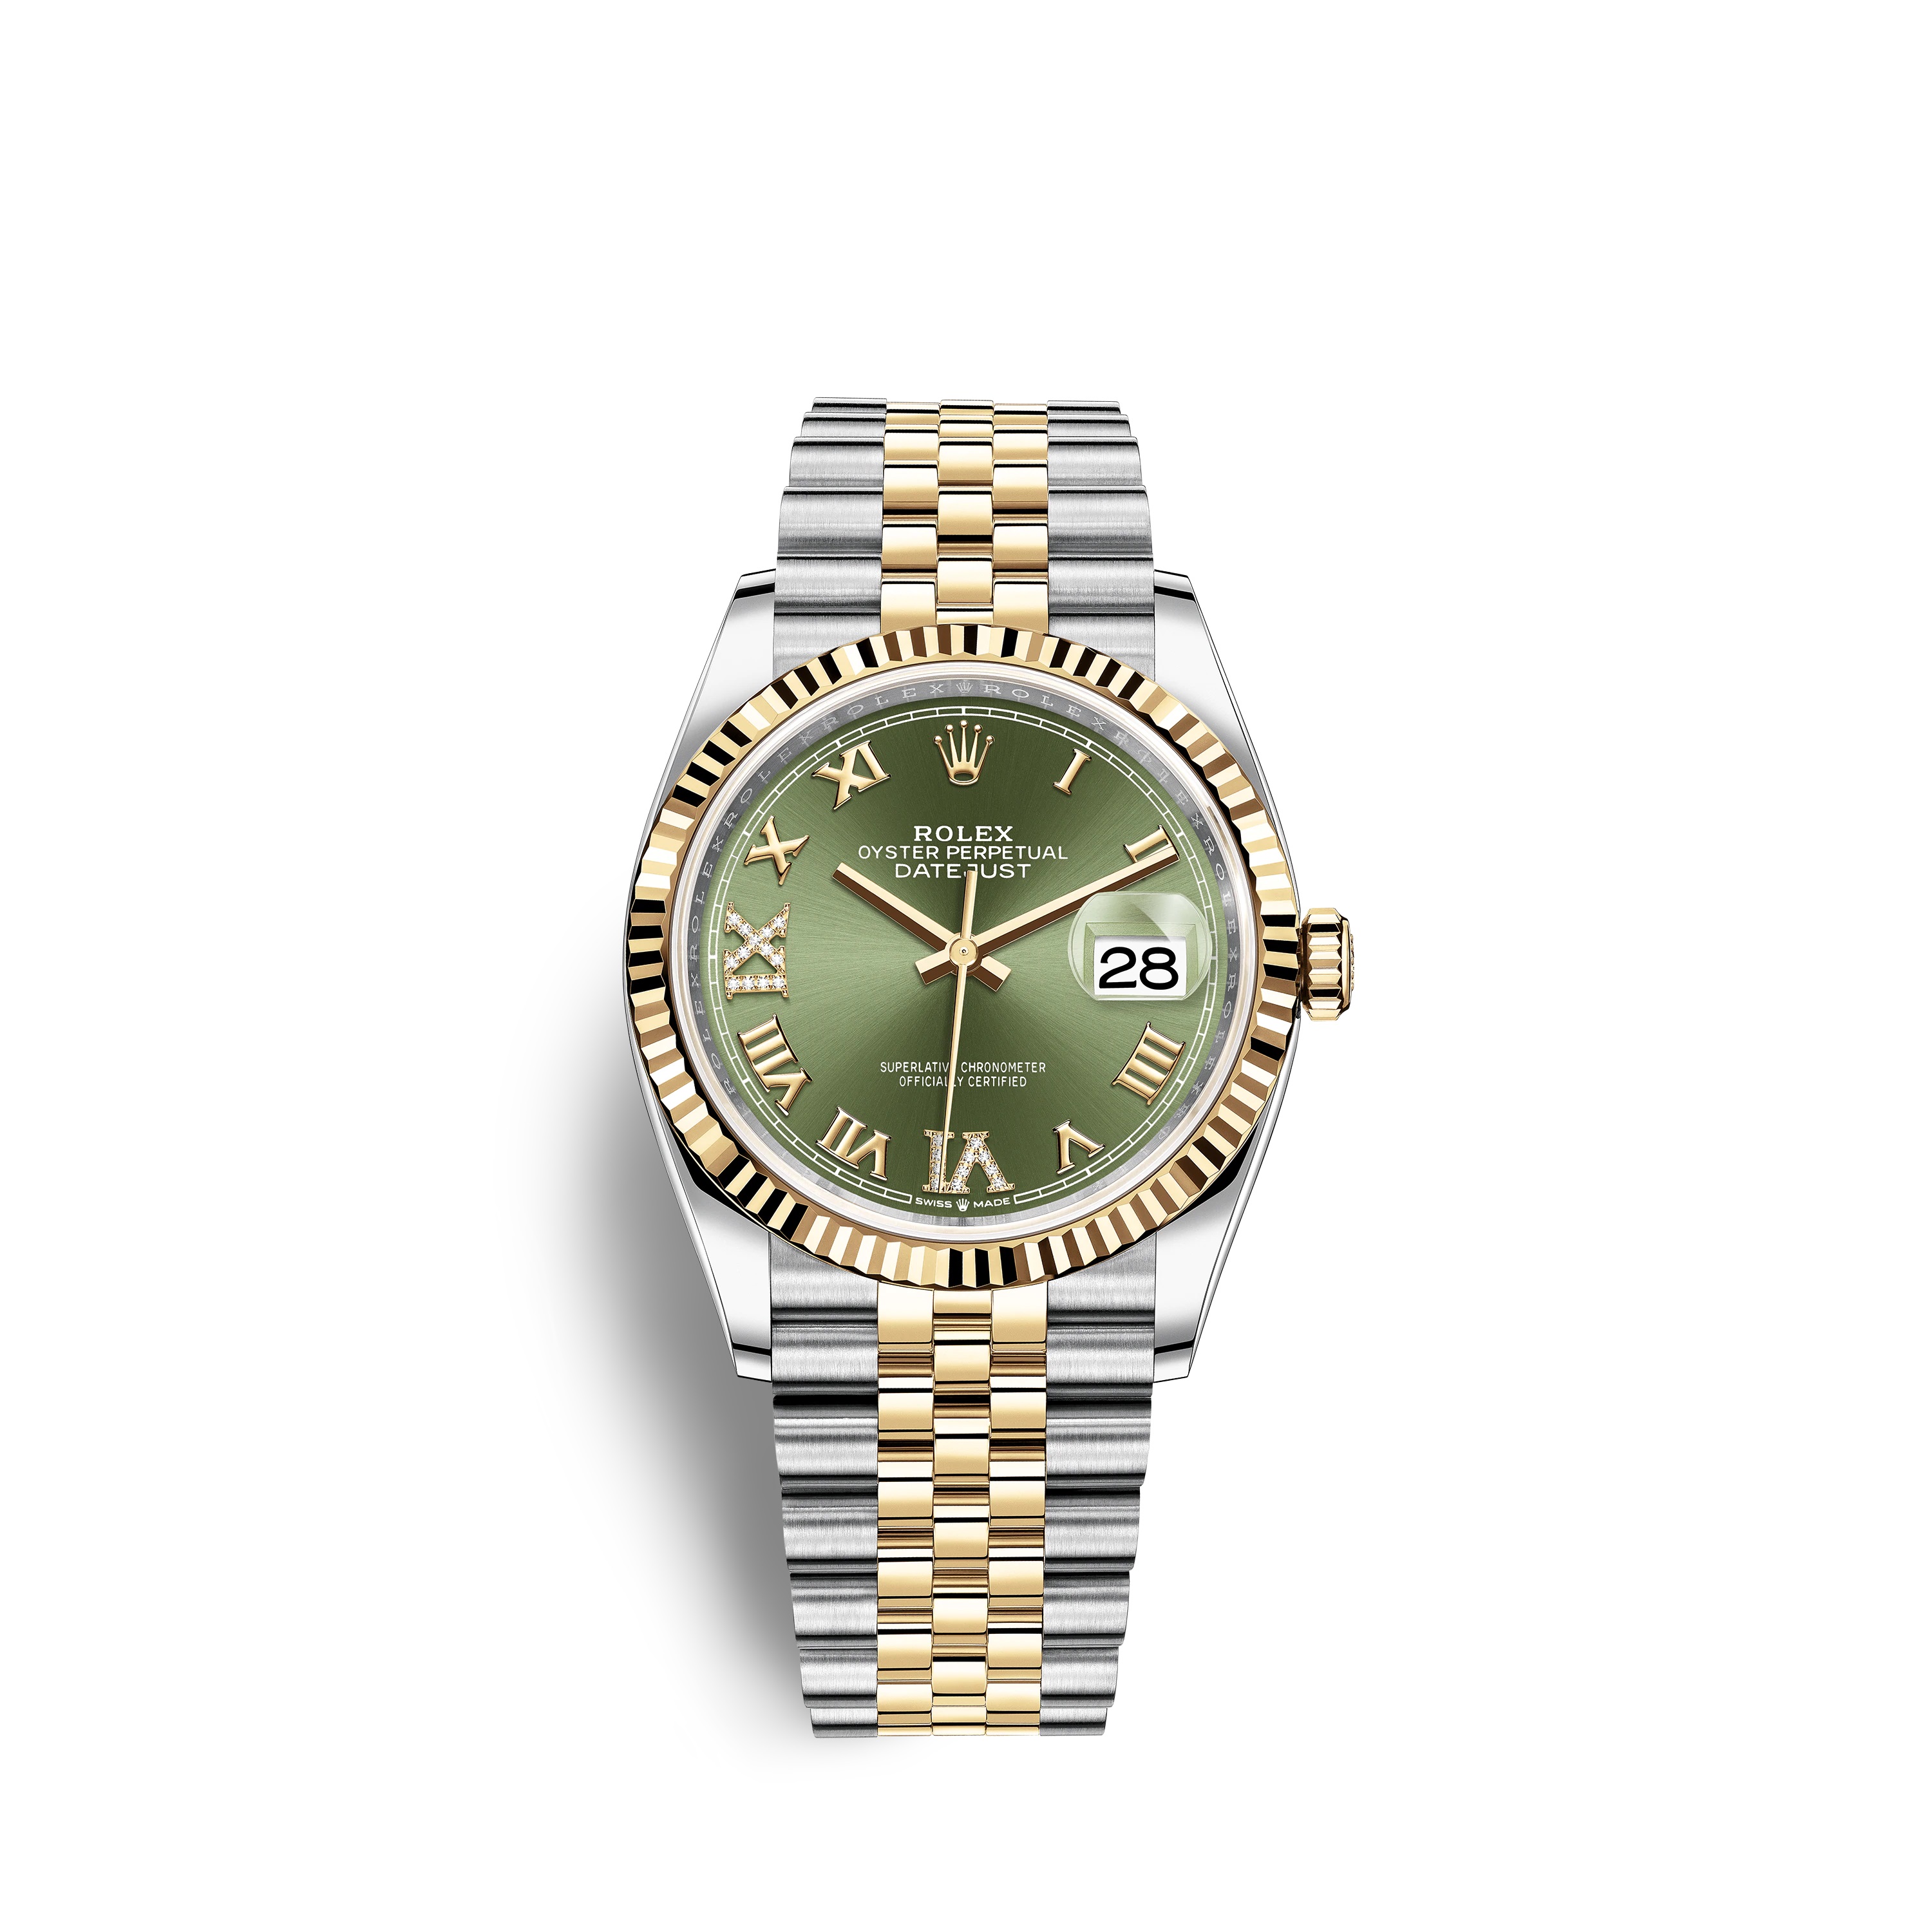 Datejust 36 126233 Gold & Stainless Steel Watch (Olive Green Set with Diamonds) - Click Image to Close